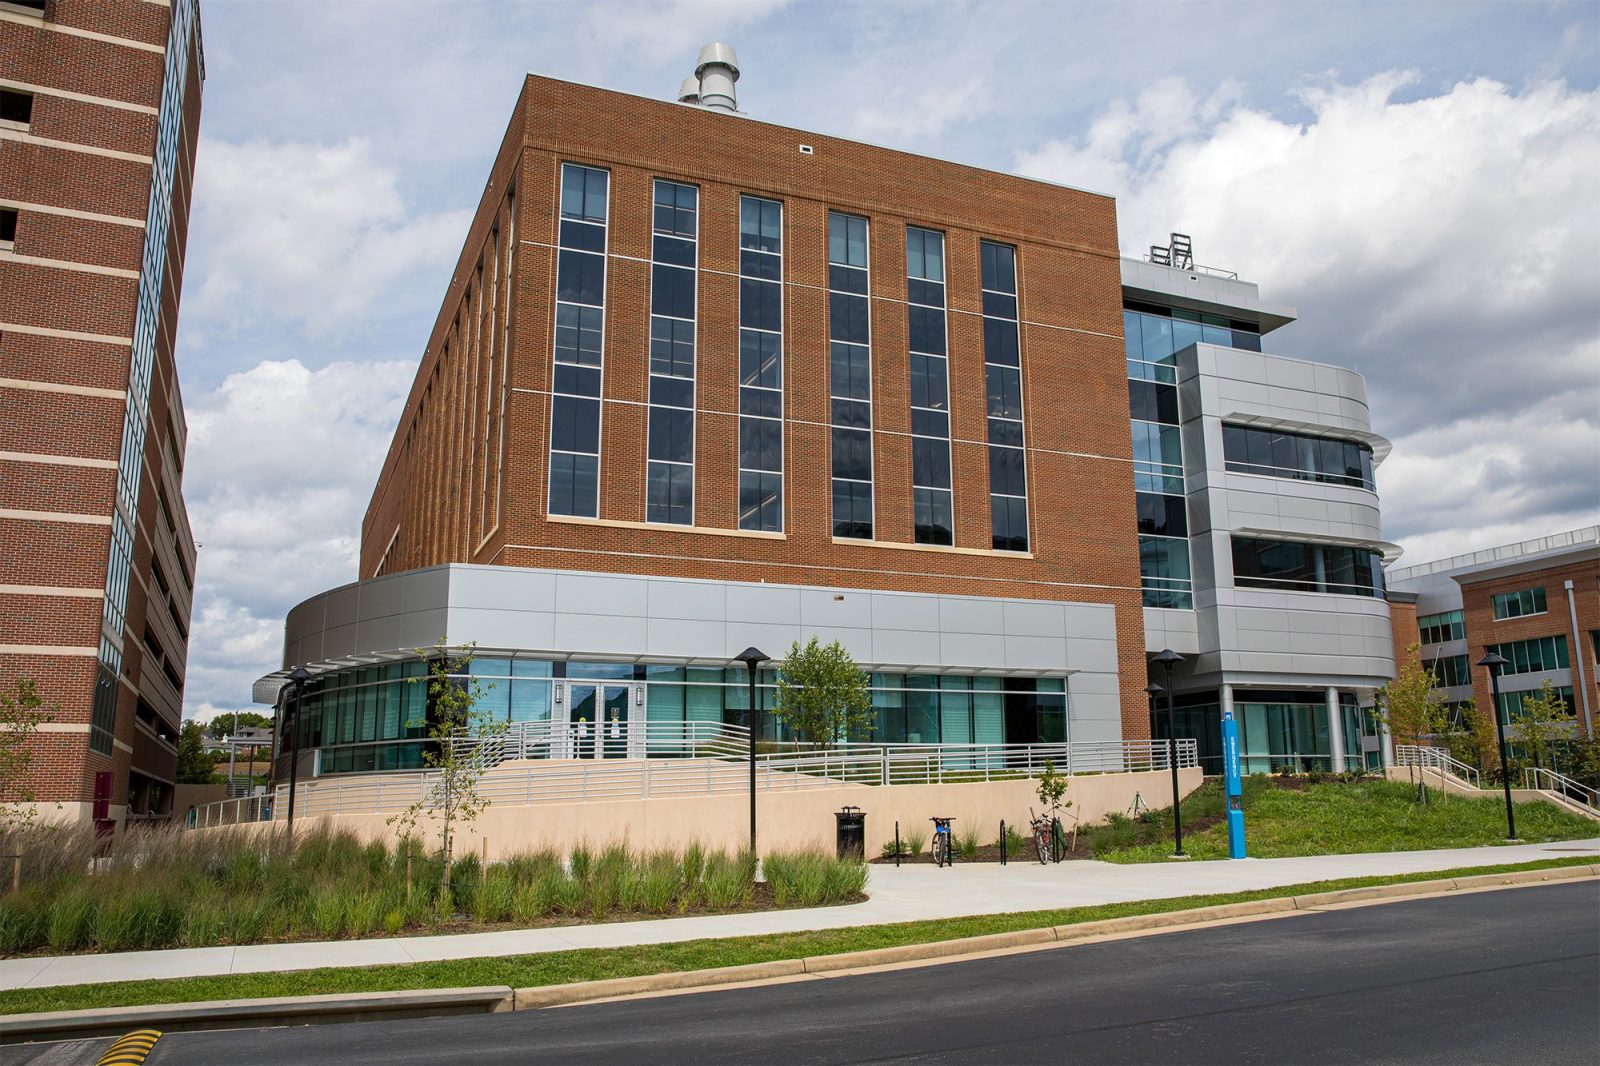 The new Animal Cancer Care and Research Center in Roanoke, Virginia